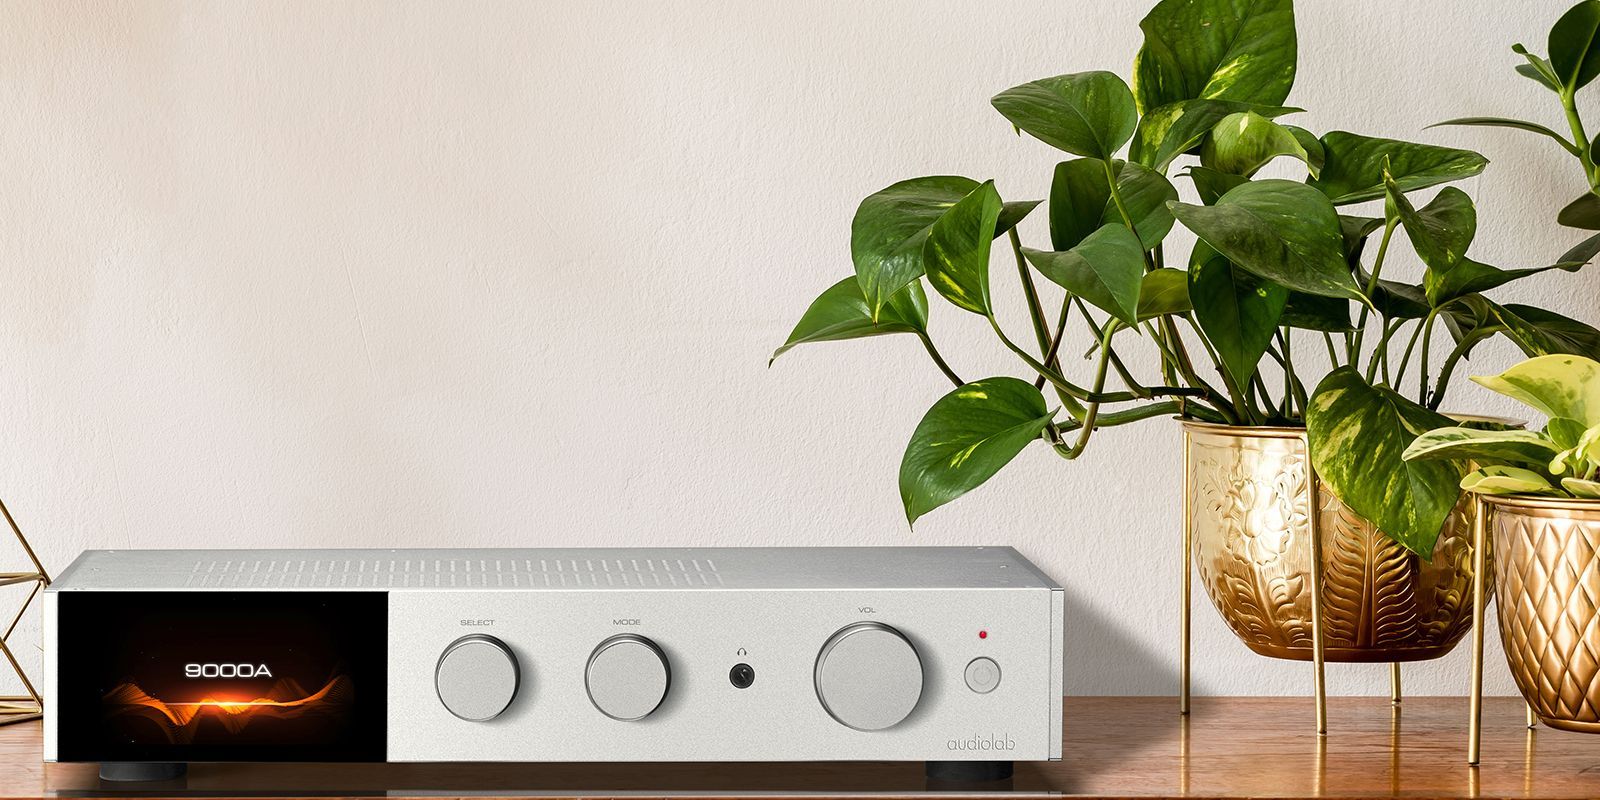 Audiolab 9000A Integrated Amplifier: The Intersection of Contemporary Art and Sonorous Science